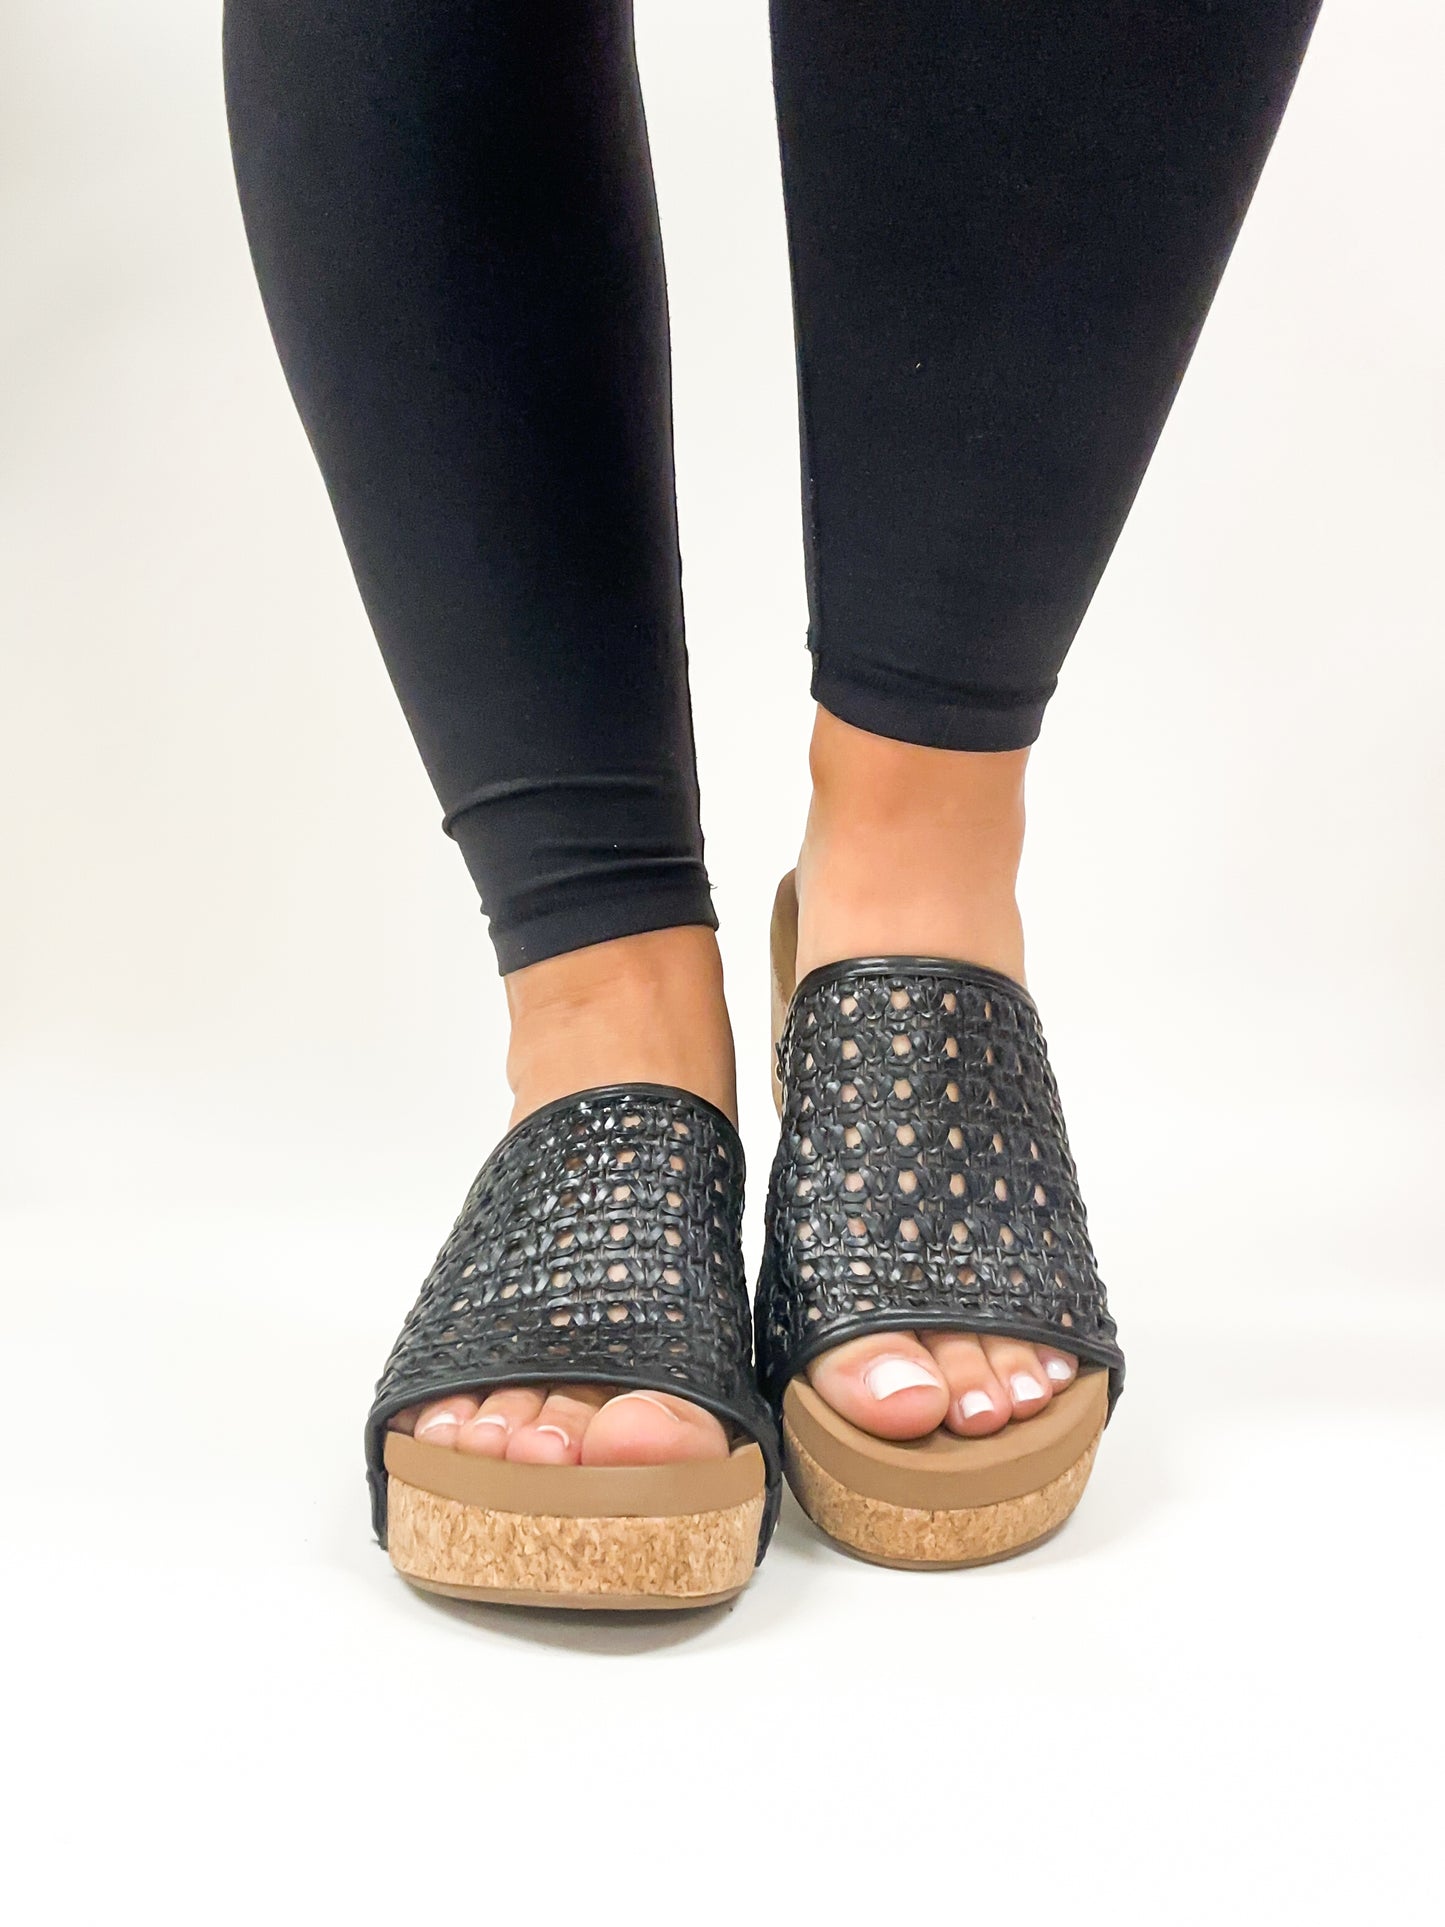 Corky's Black Vacation Sandals